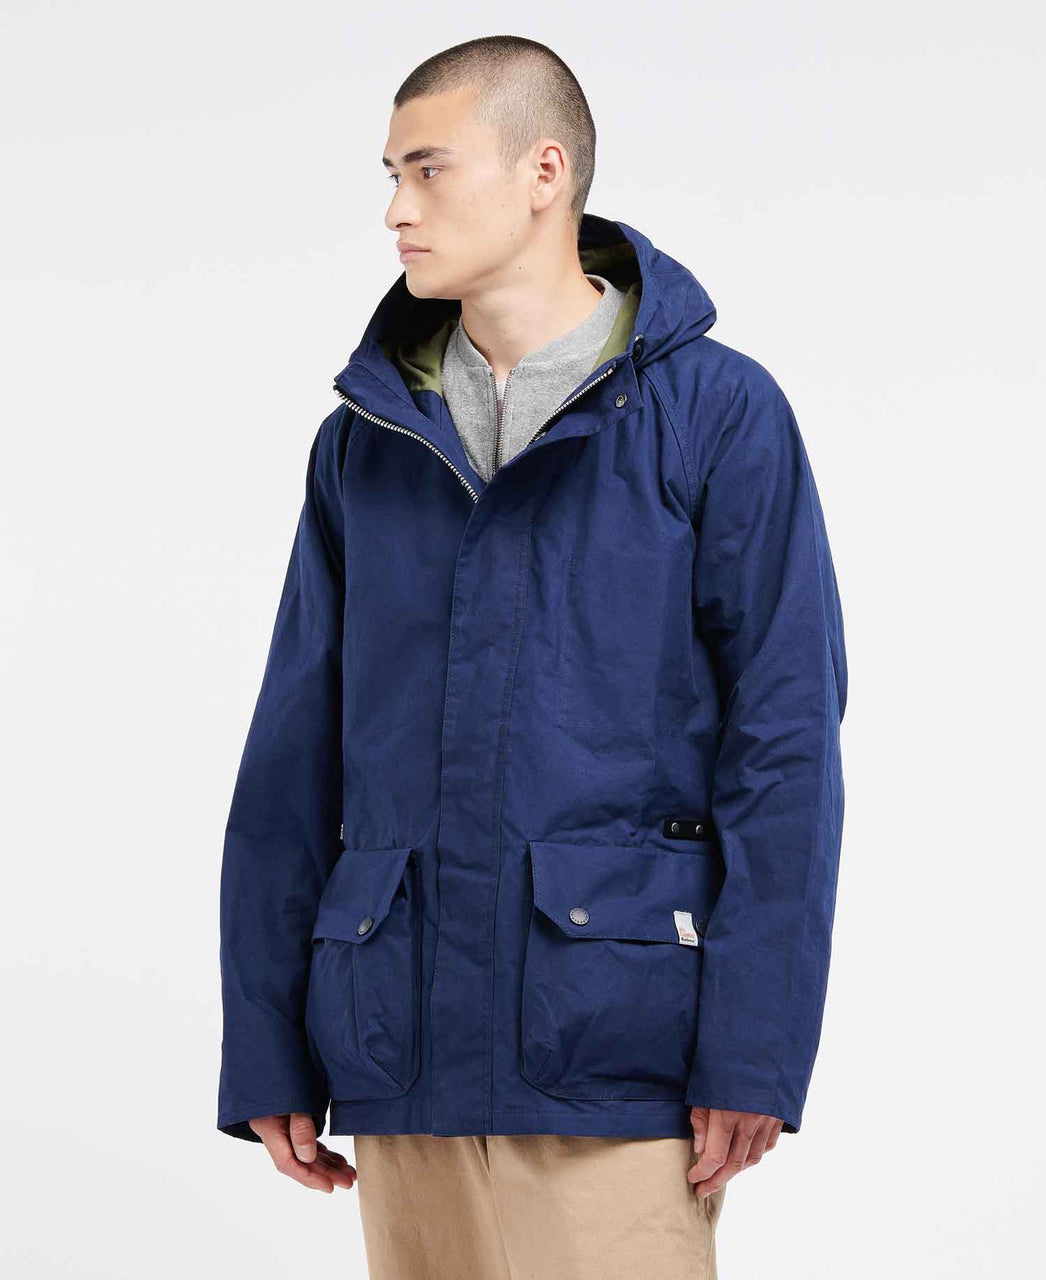 Ally Capellino x Barbour Ernest Waxed Cotton Jacket in Navy